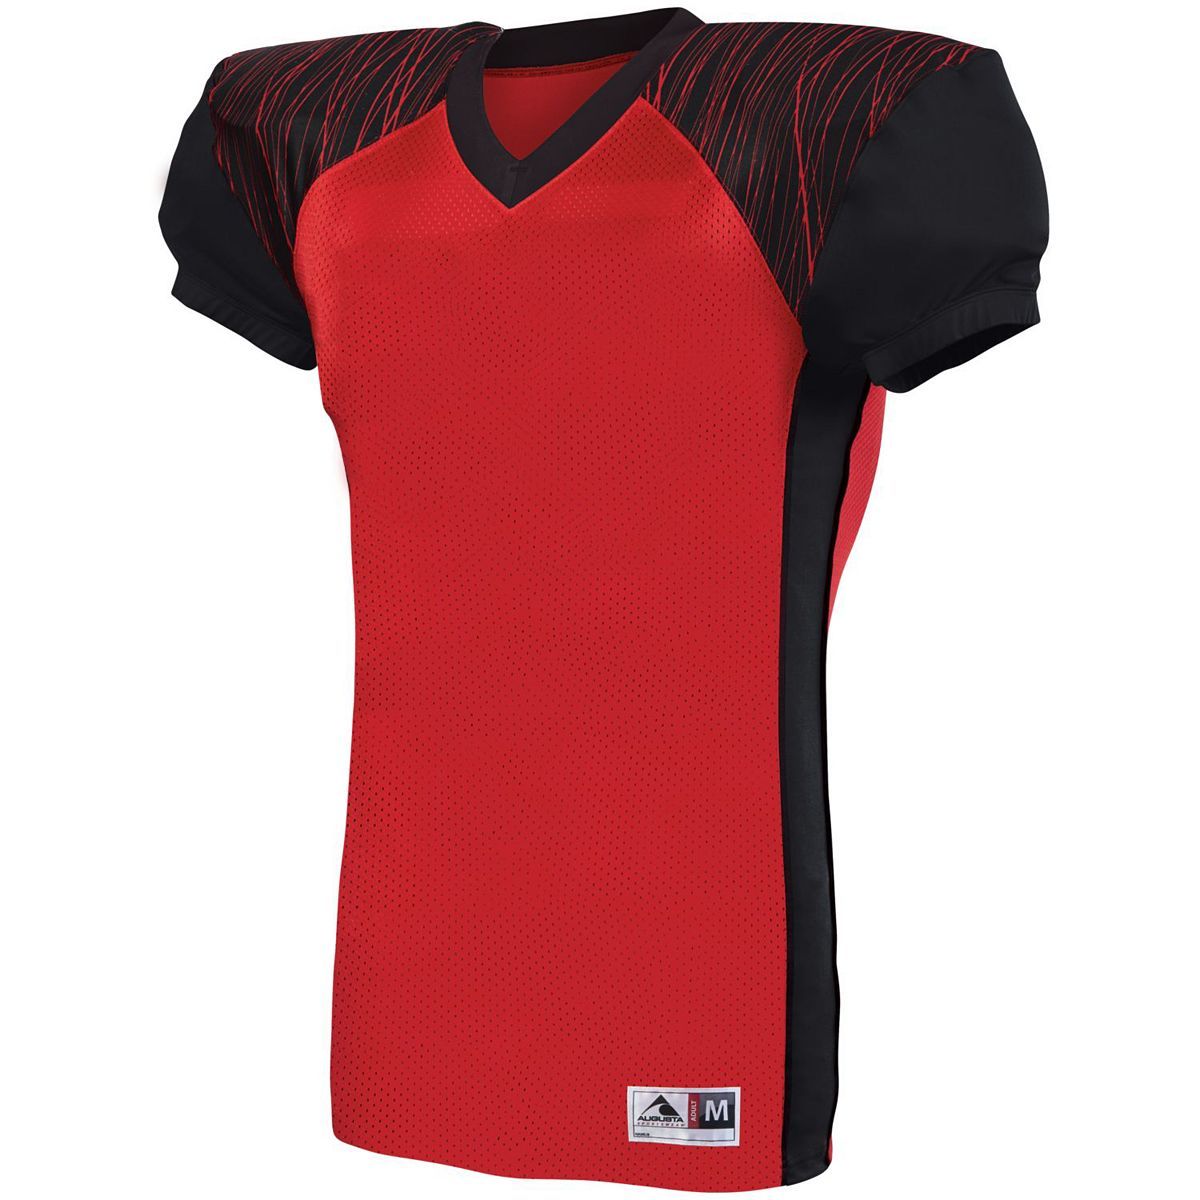 Augusta Sportswear Youth Zone Play Jersey in Red/Black/Red Print  -Part of the Youth, Youth-Jersey, Augusta-Products, Football, Shirts, All-Sports, All-Sports-1 product lines at KanaleyCreations.com